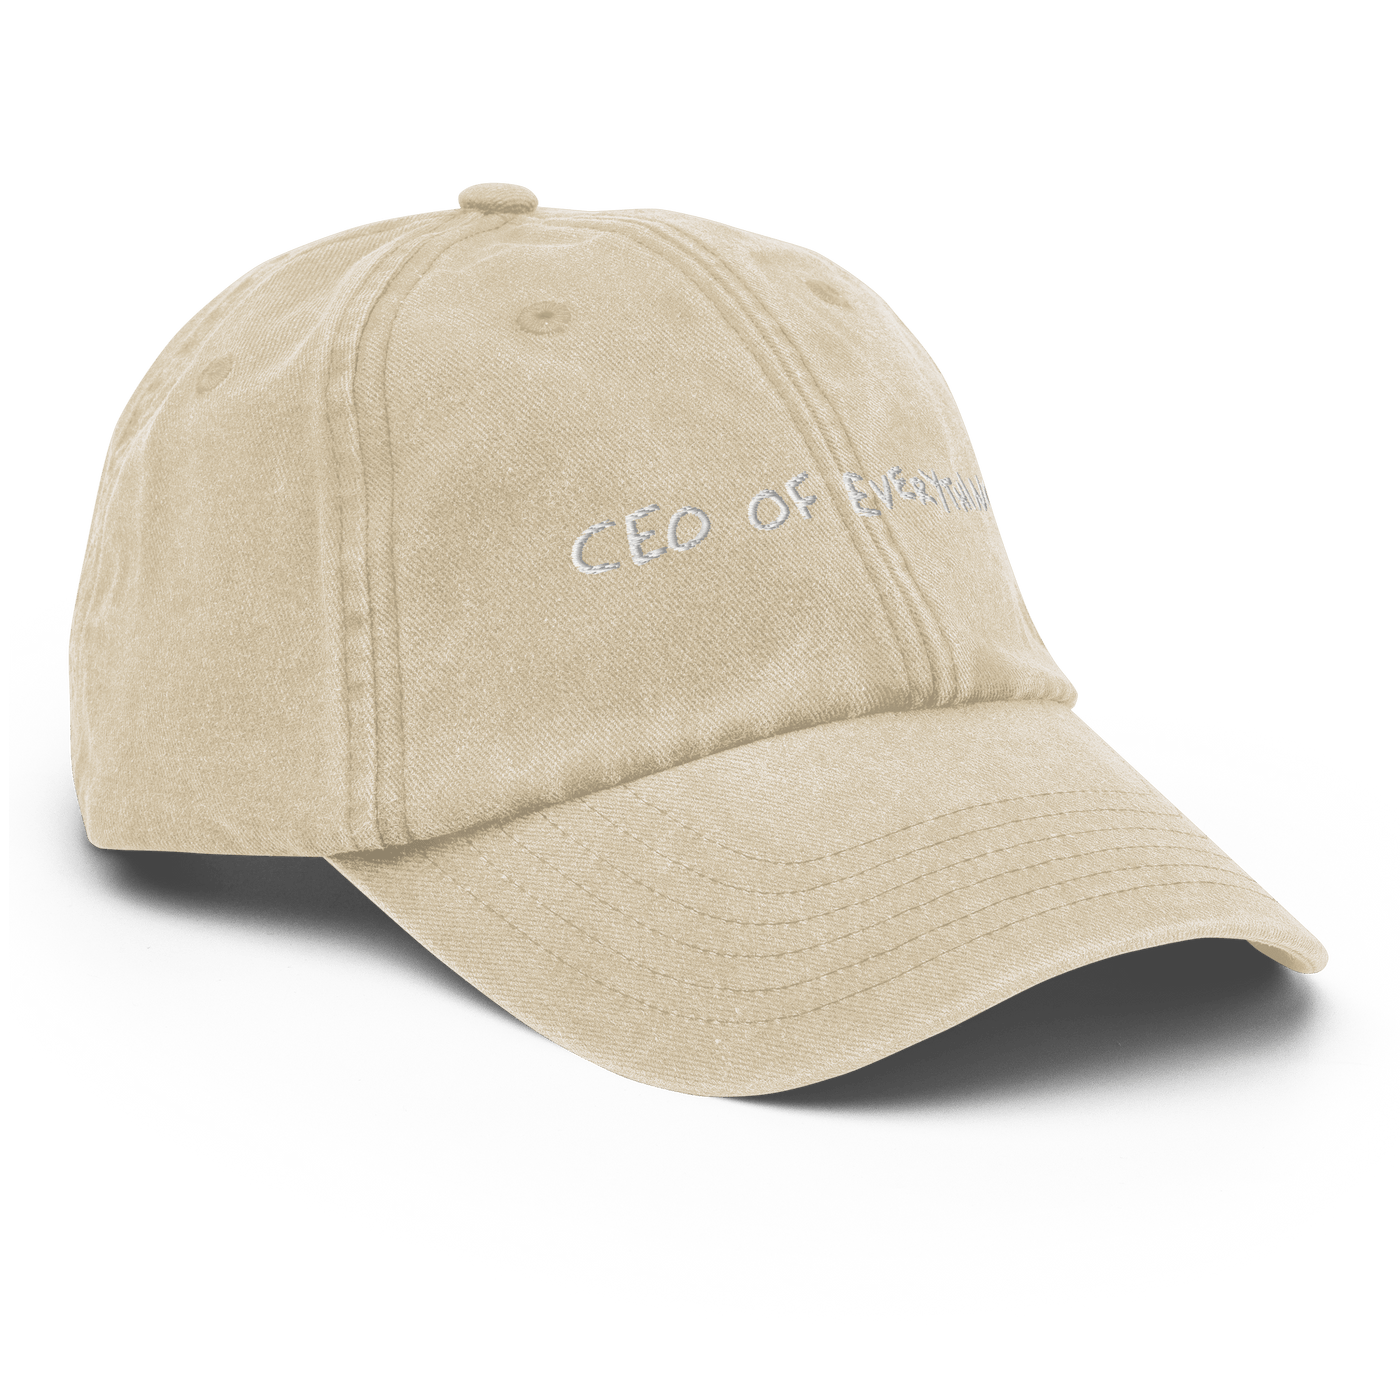 CEO of everything Vintage Hat - Vintage Stone - - Just Another Cap Store